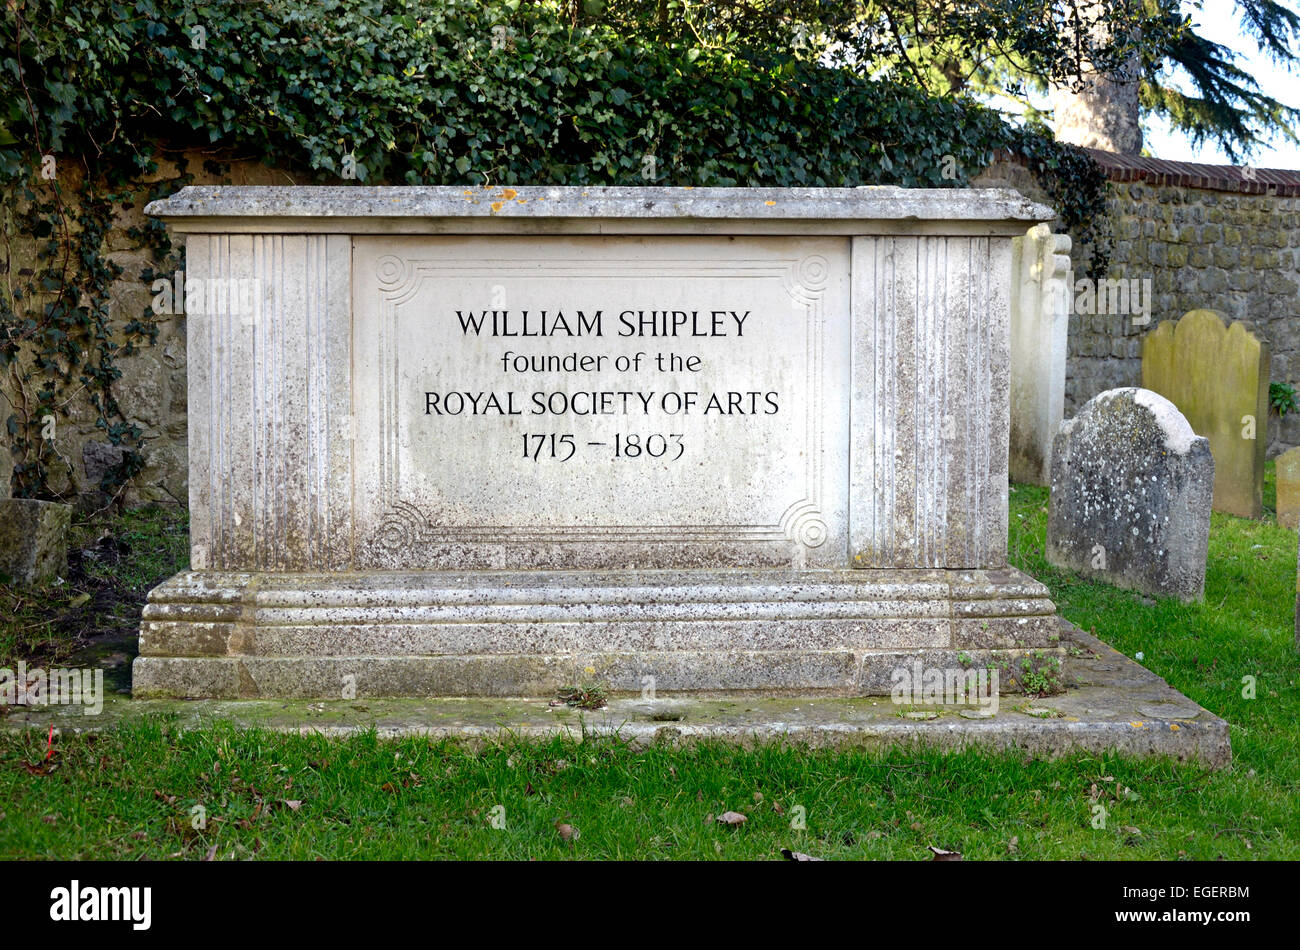 Maidstone, Kent, England, UK. All Saints Church churchyard; Grave of William Shipley, founder of the Royal Society of Arts Stock Photo